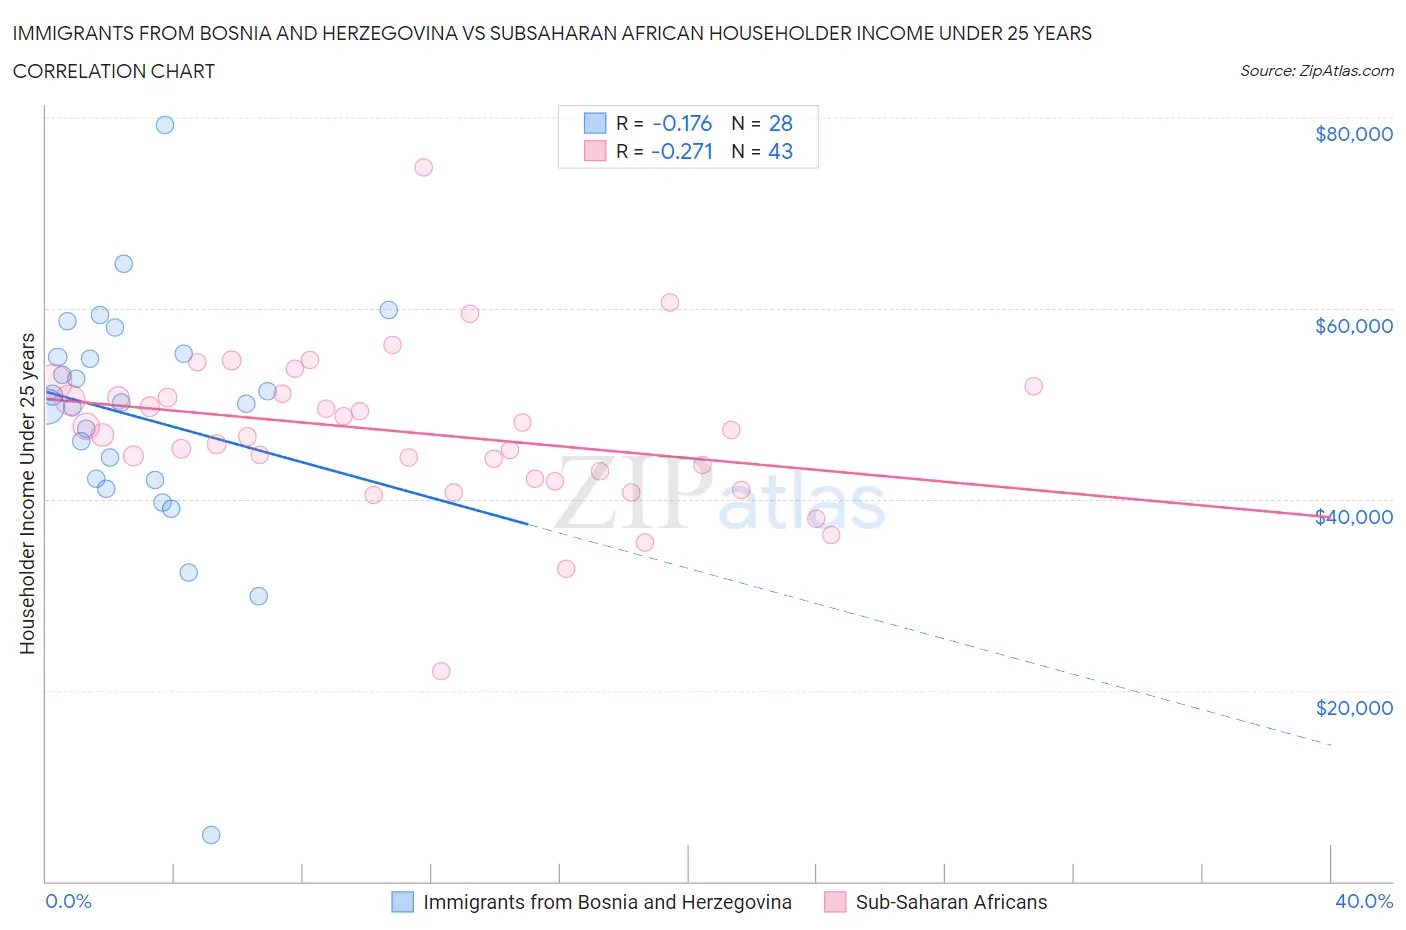 Immigrants from Bosnia and Herzegovina vs Subsaharan African Householder Income Under 25 years